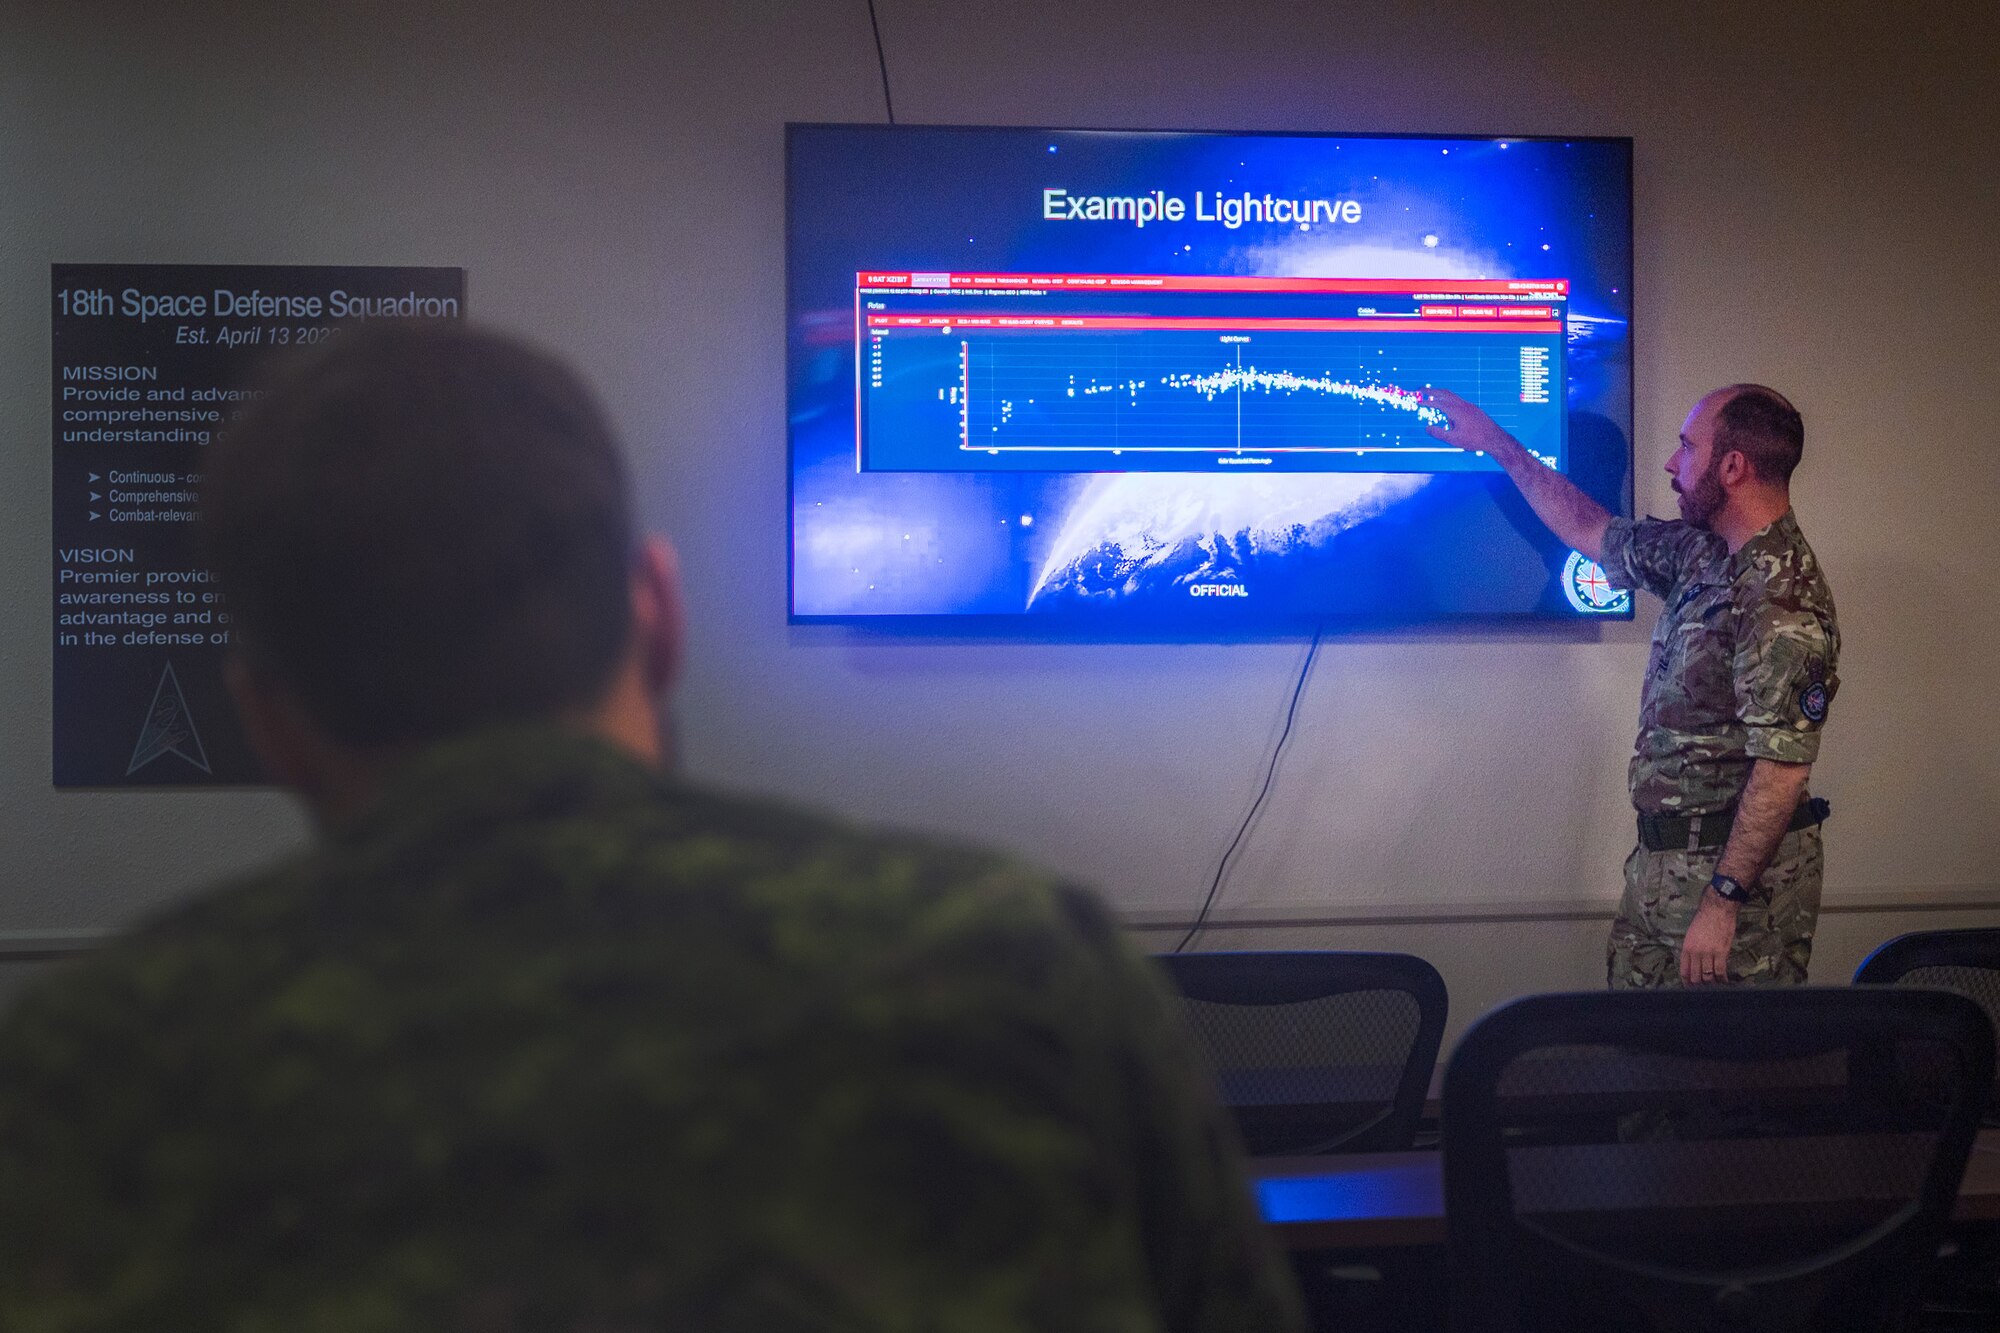 Royal Air Force (RAF) Flying Officer Hallchurch, U.K. Space Operations Centre (UKSpOC) space duty officer, briefs members of the 18th Space Defense Squadron during the first day of the Operator Exchange program at Vandenberg Space Force Base, Calif., Feb. 13, 2023. The U.K. was the first state to publicly join the U.S. led Operation Olympic Defender – an effort to enable international sharing of space resources and the synchronization of space efforts aimed at strengthening allies abilities to deter hostile actions by rivals. (U.S. Space Force photo by Tech. Sgt. Luke Kitterman)